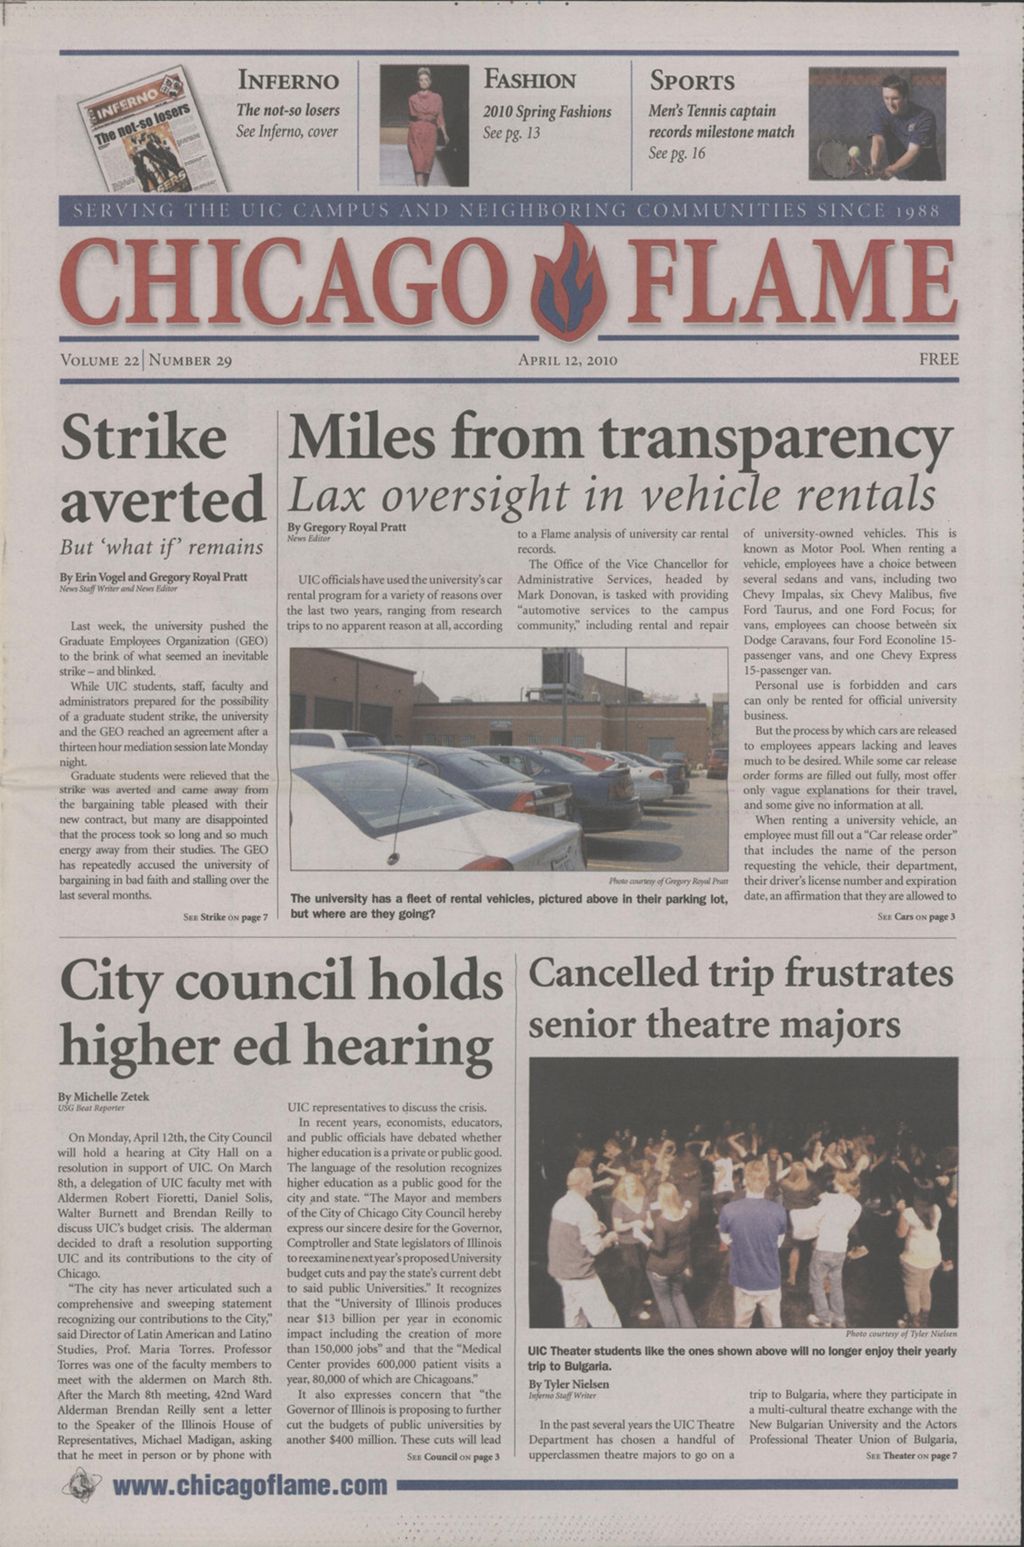 Chicago Flame (April 12, 2010)